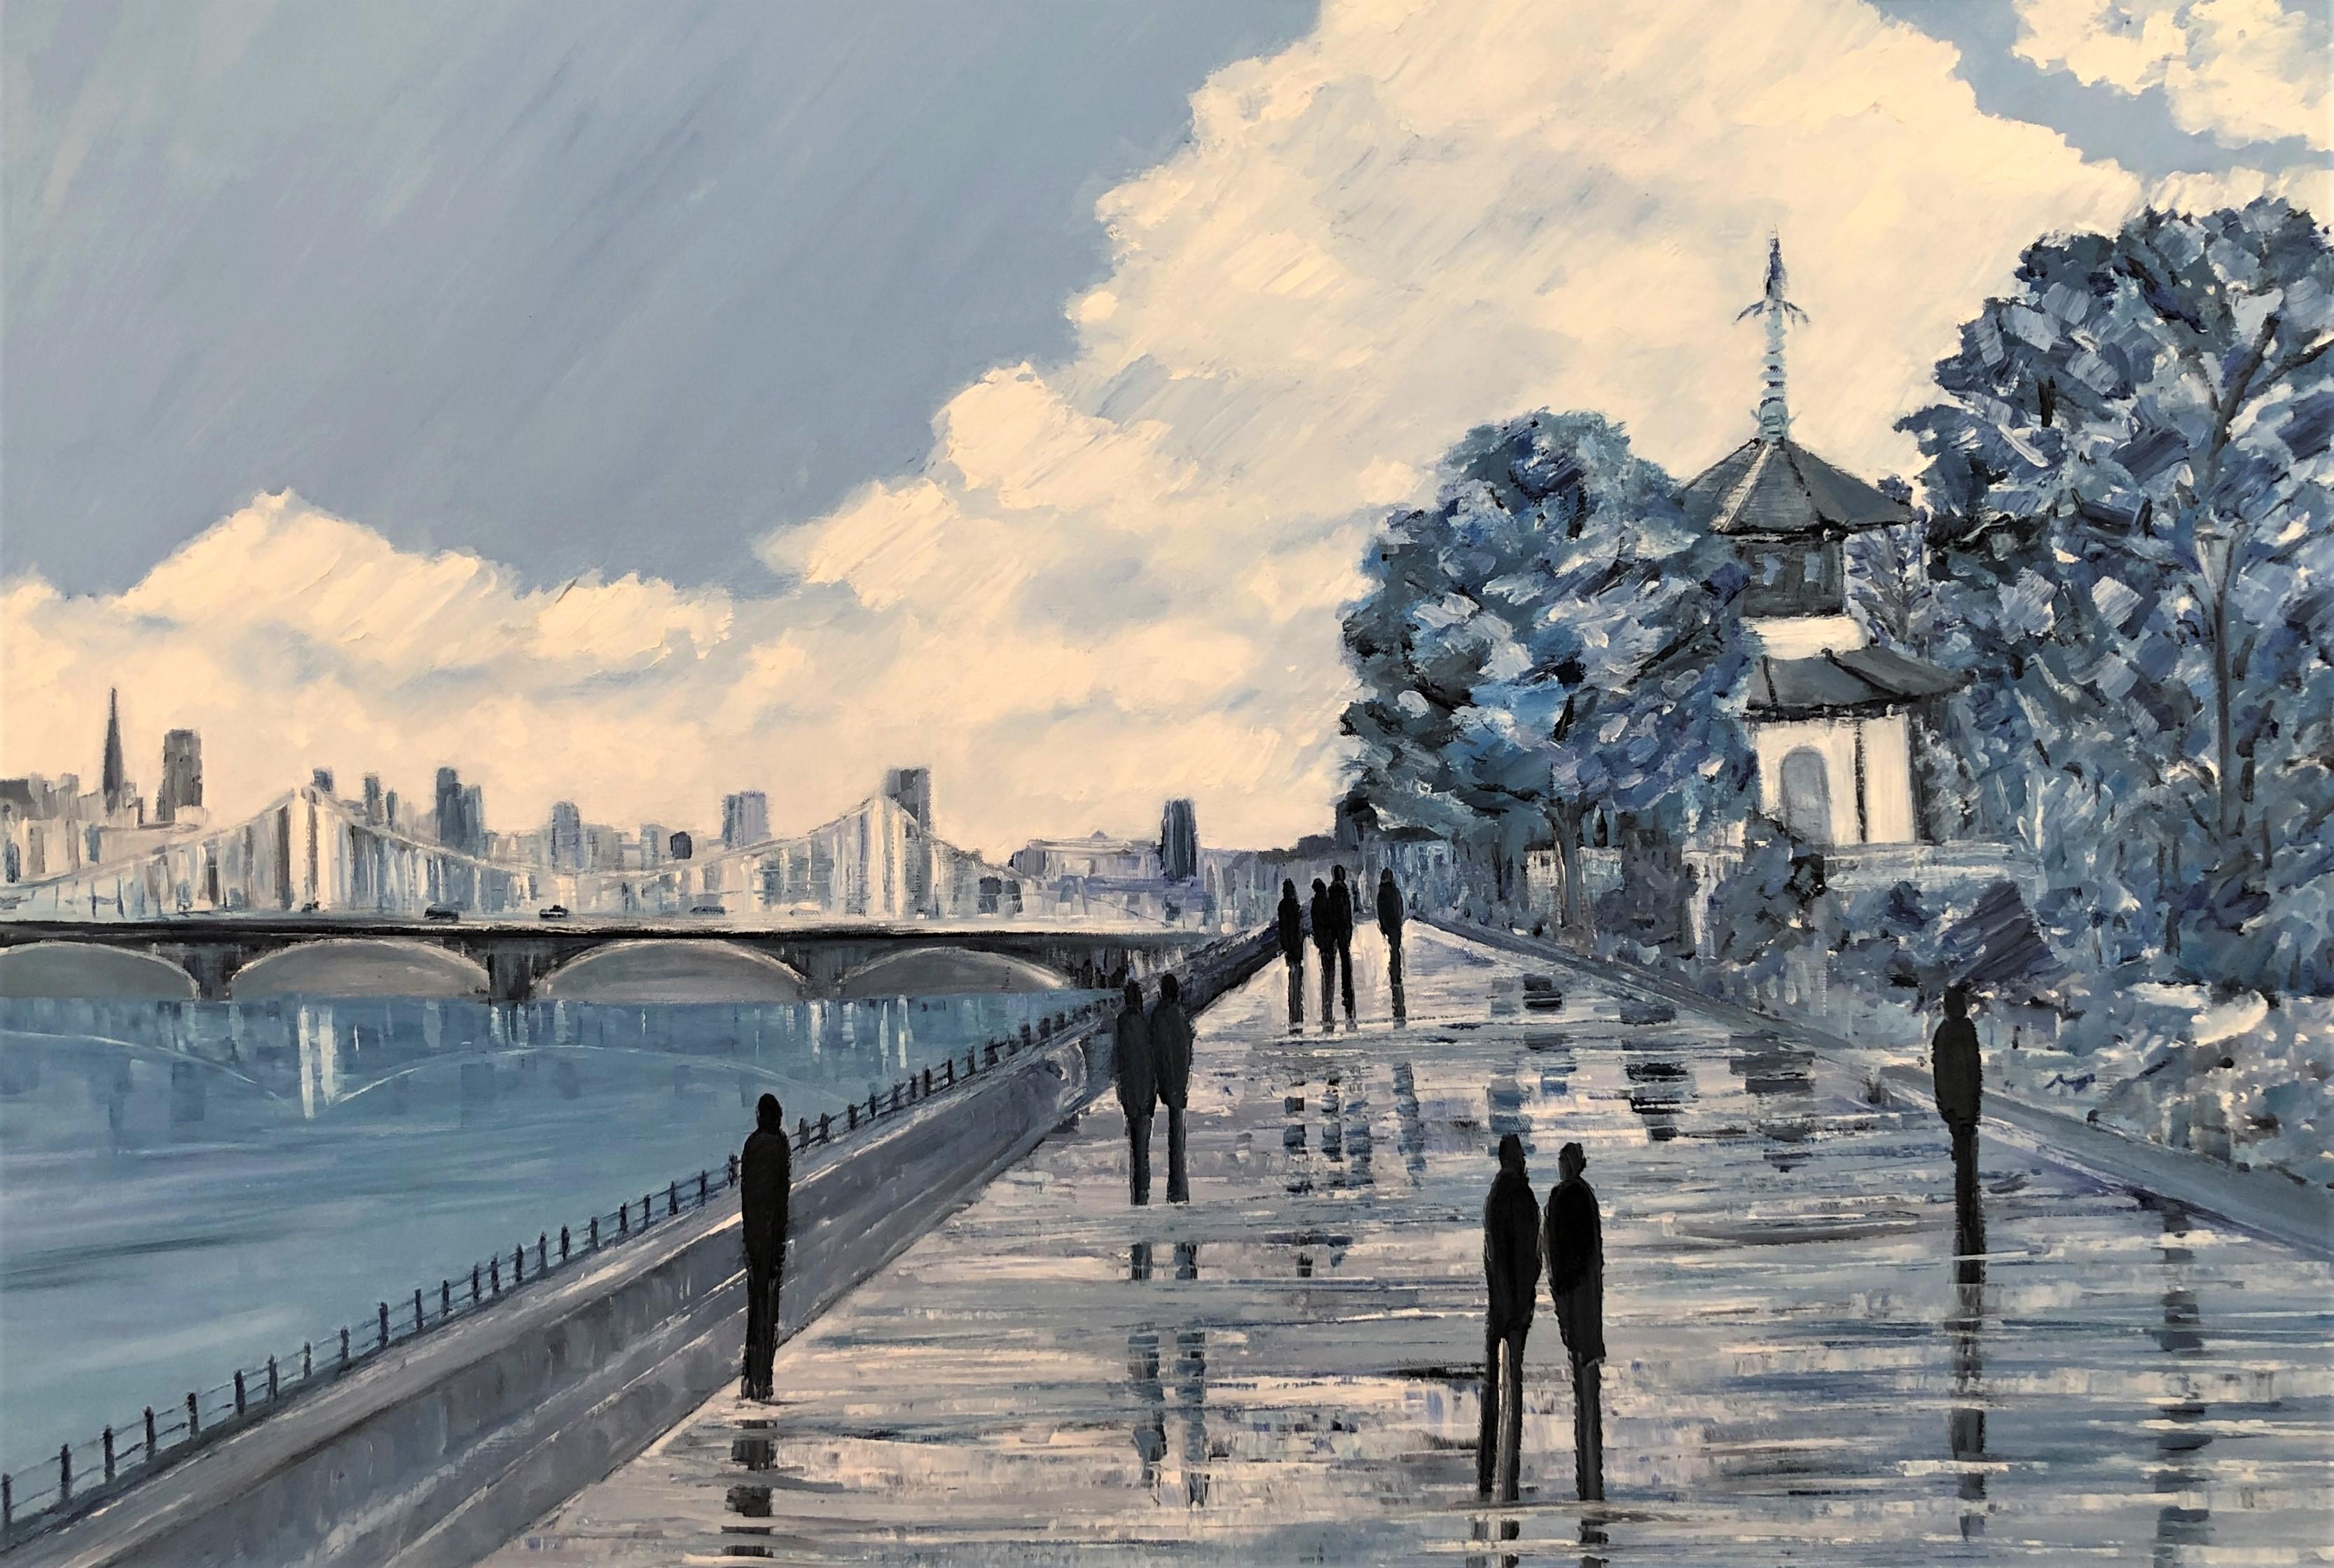 ‘Battersea Walk’ is a stunning new oil on canvas painting by Award winning London artist Jo Holdsworth. 

The painting shows this well known London view of the banks of the River Thames near Battersea Park looking towards Chelsea Bridge, with the